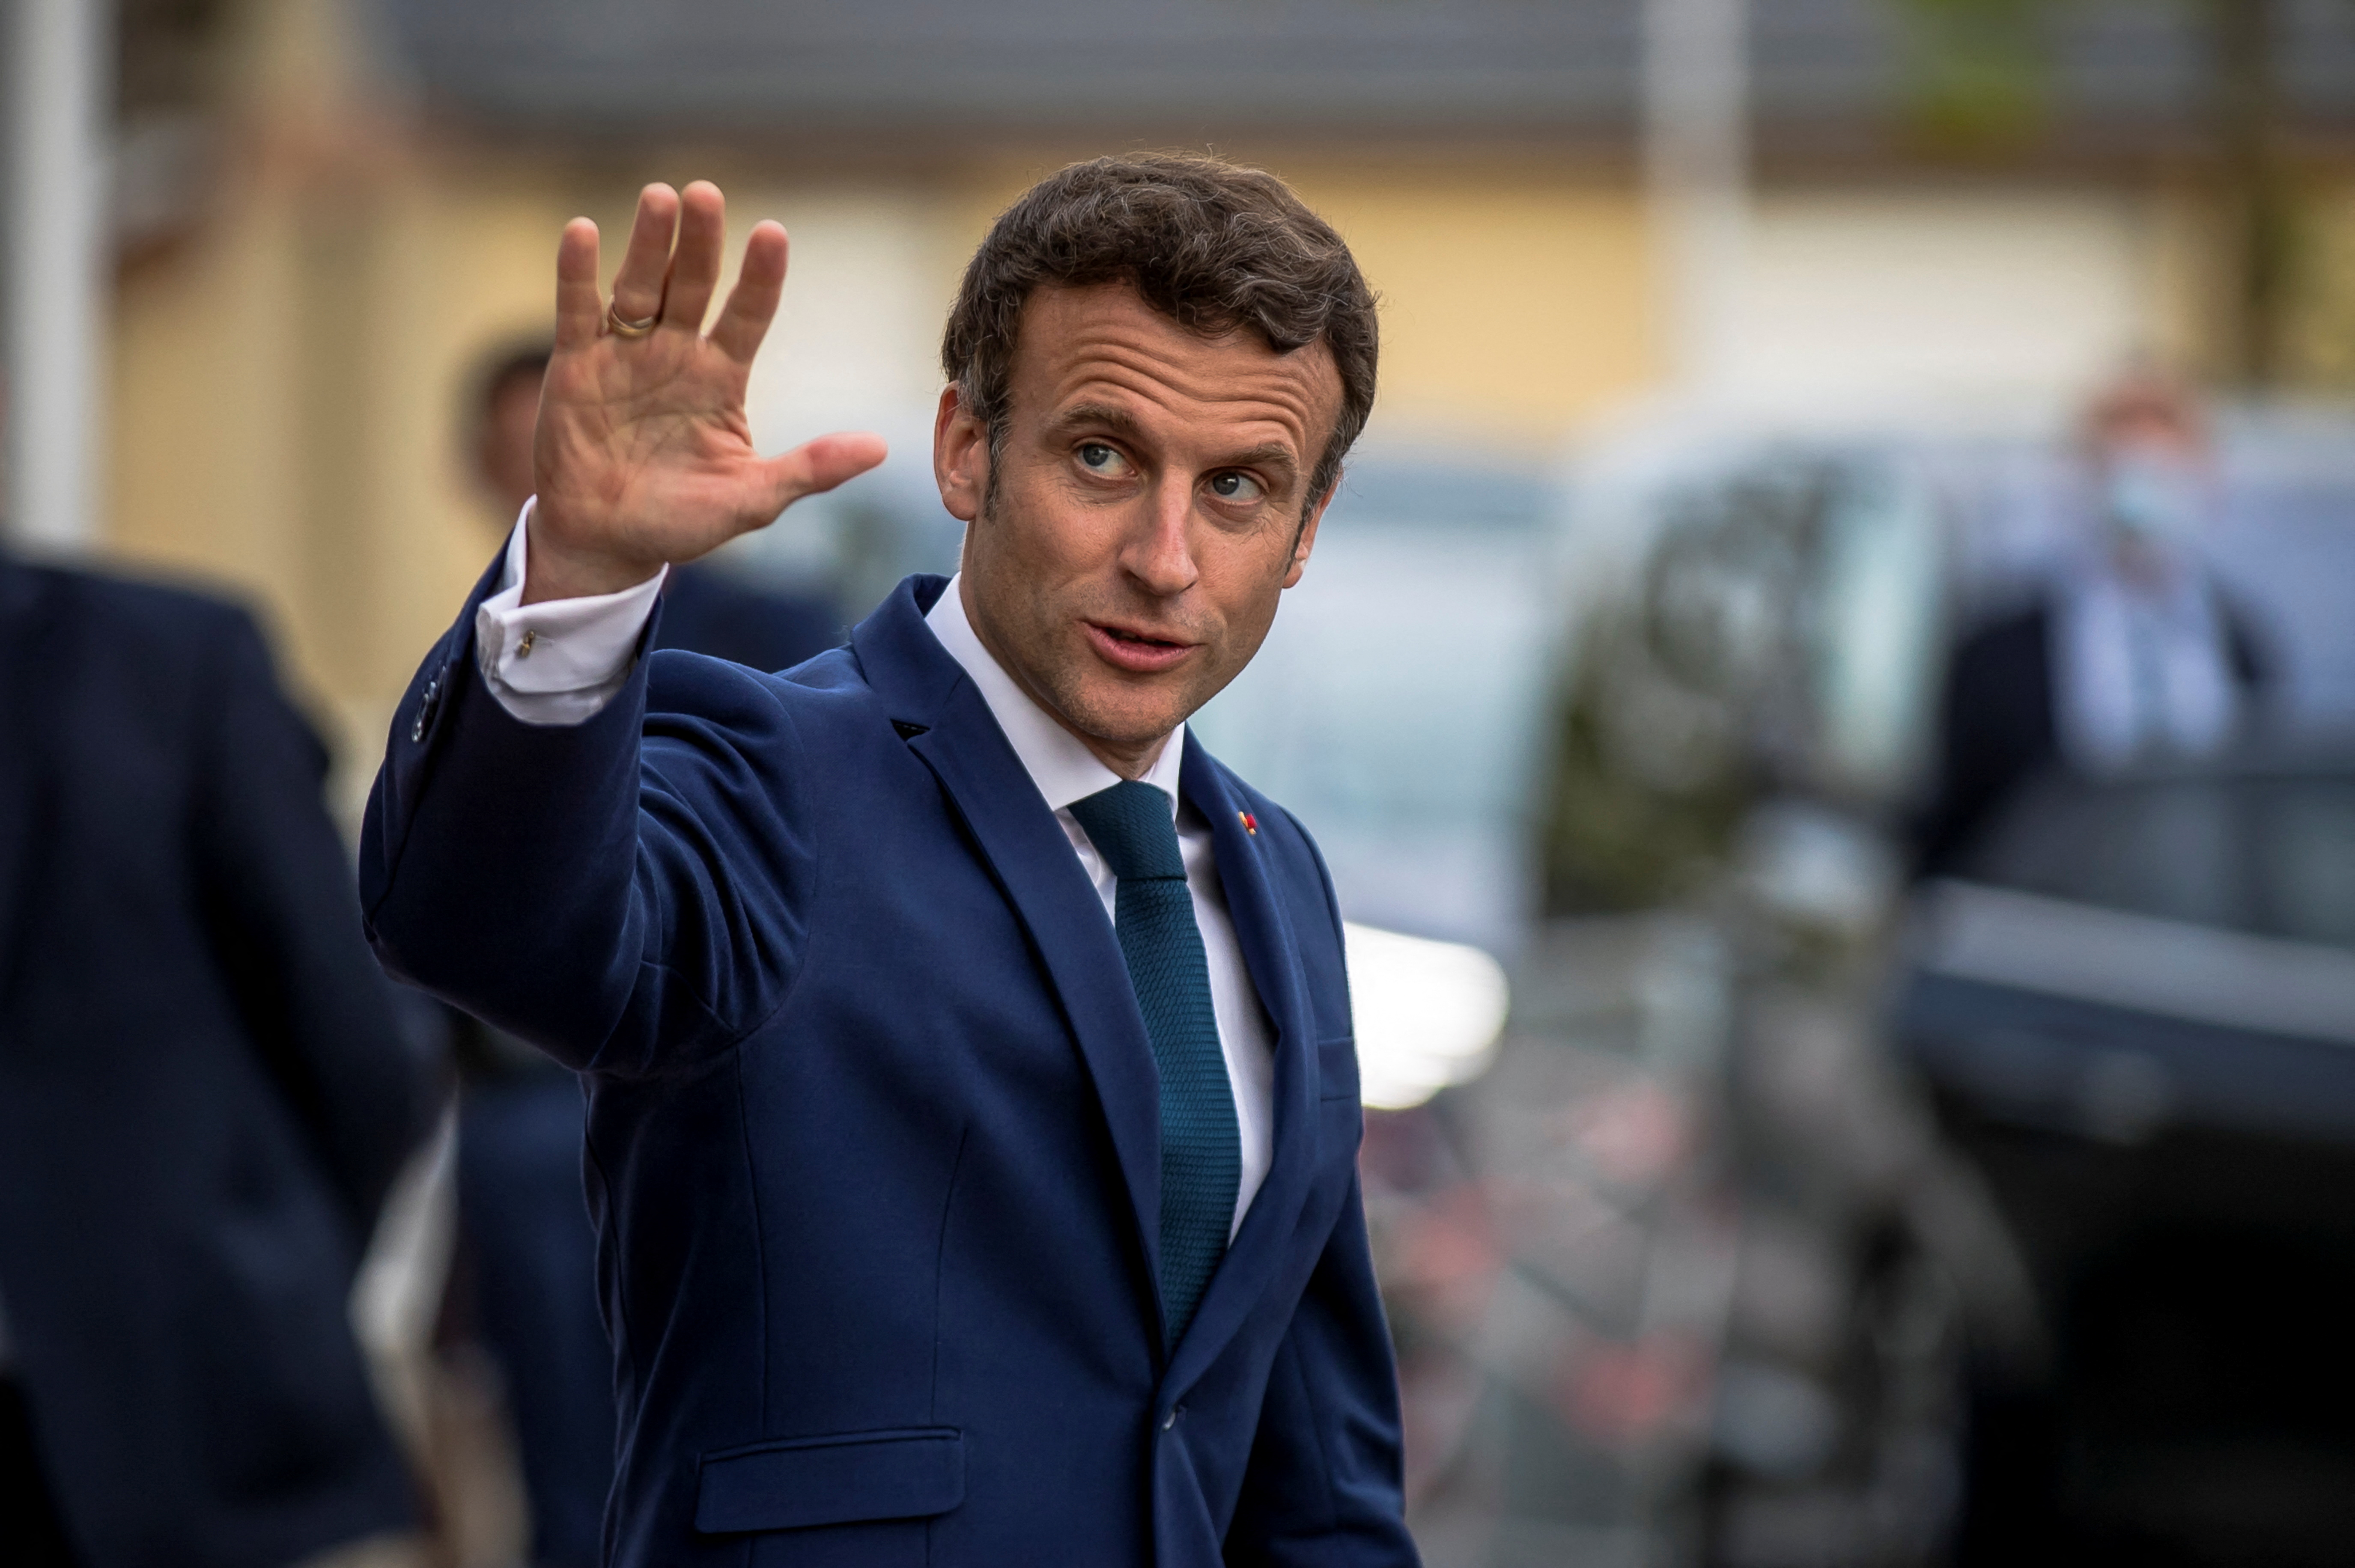 France will increase financial aid to Ukraine by $300 mln, Macron tells donor conference | Reuters